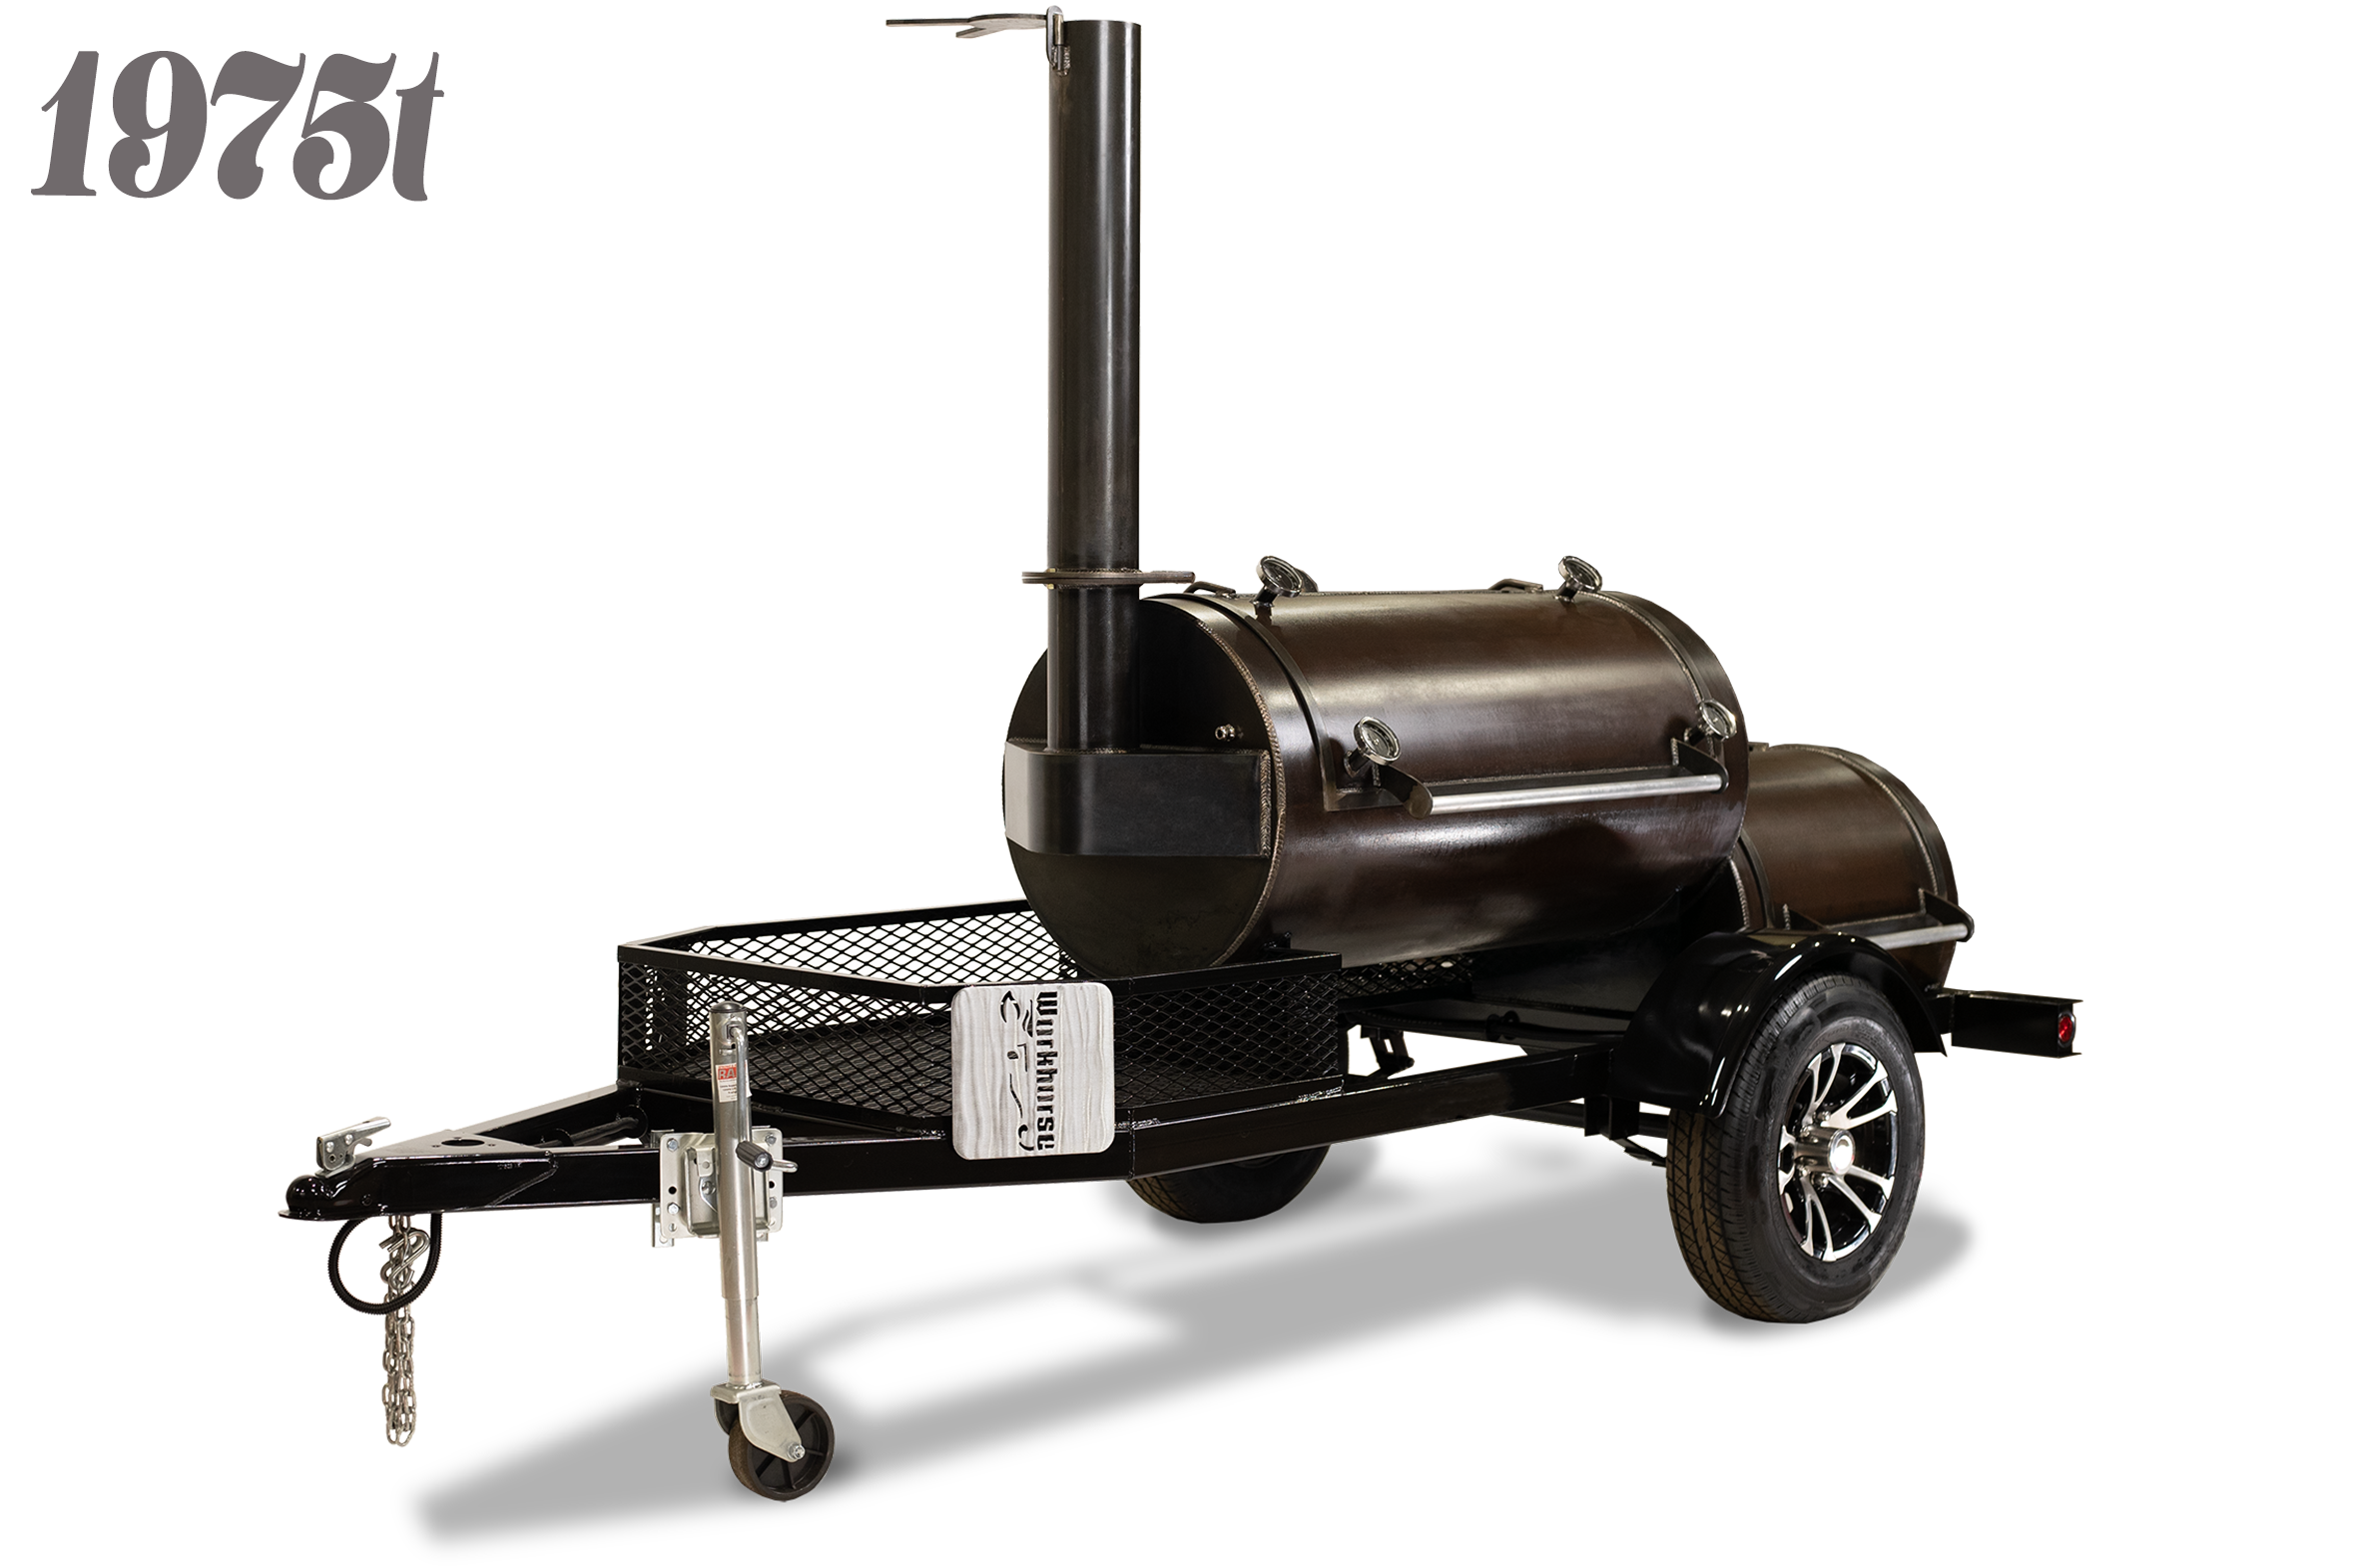 1957 Offset Smoker by Workhorse Pits - The Compact Powerhouse for Your  Backyard